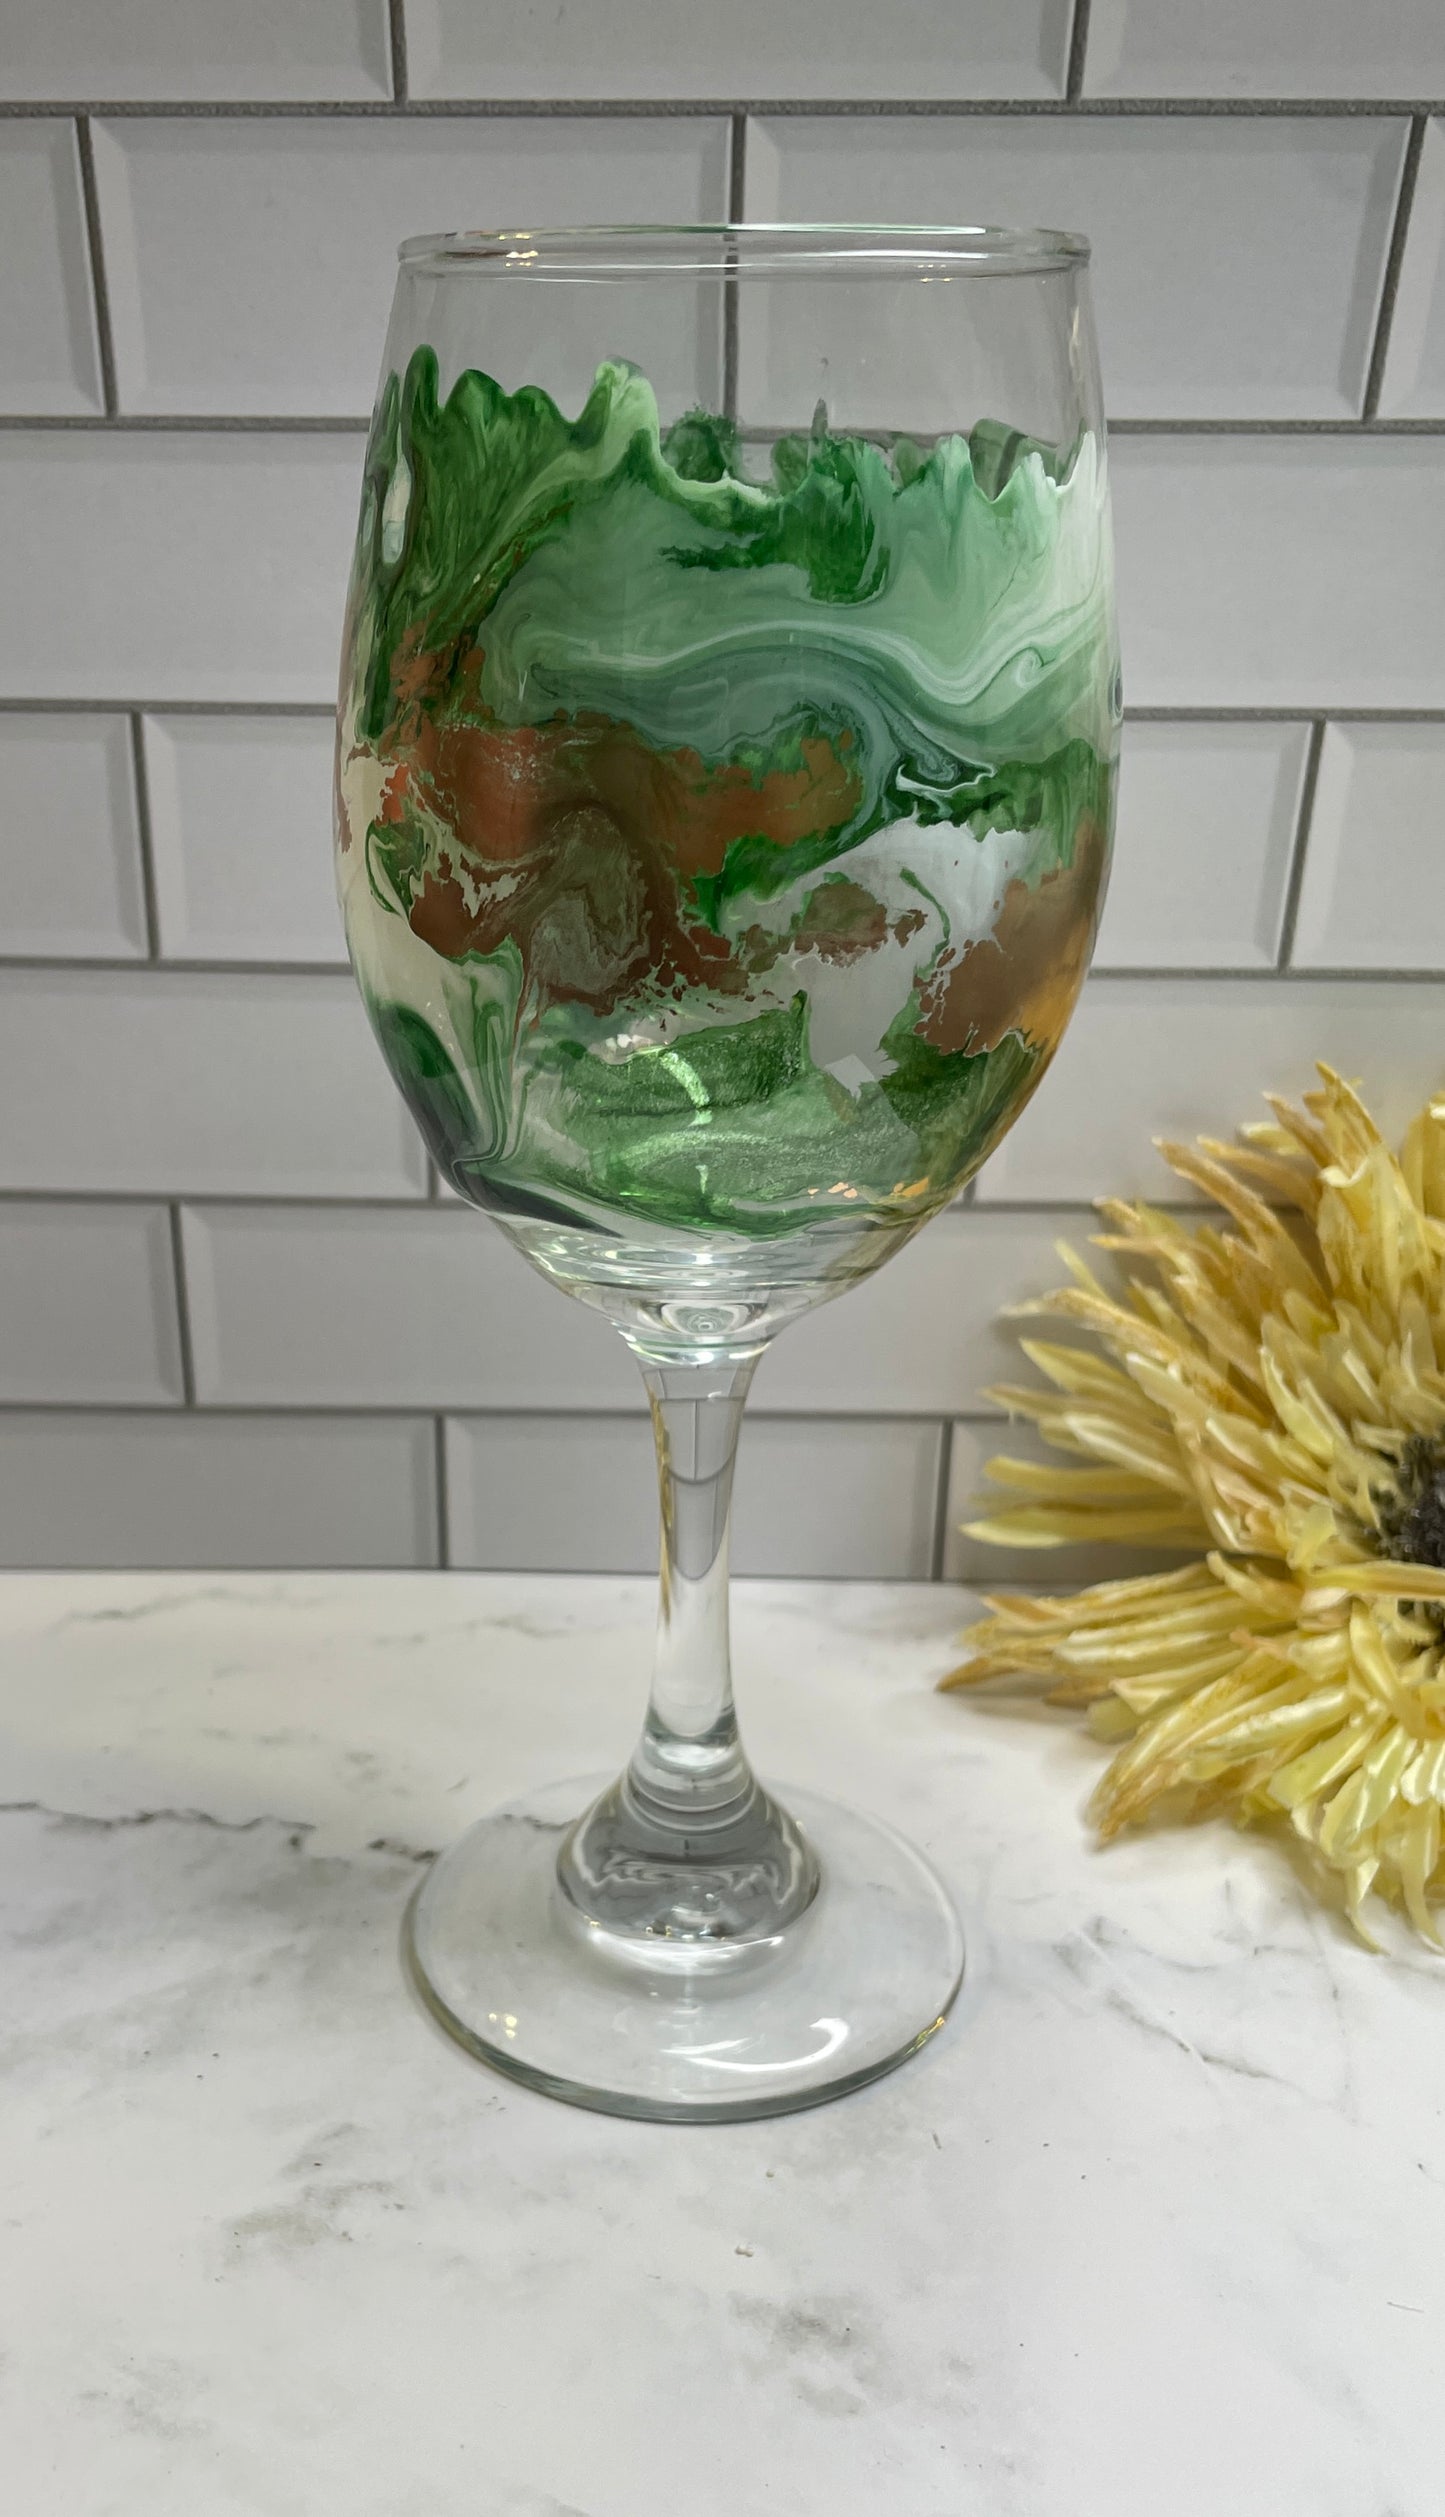 Green, Gold & White Middle Design Wine Glass